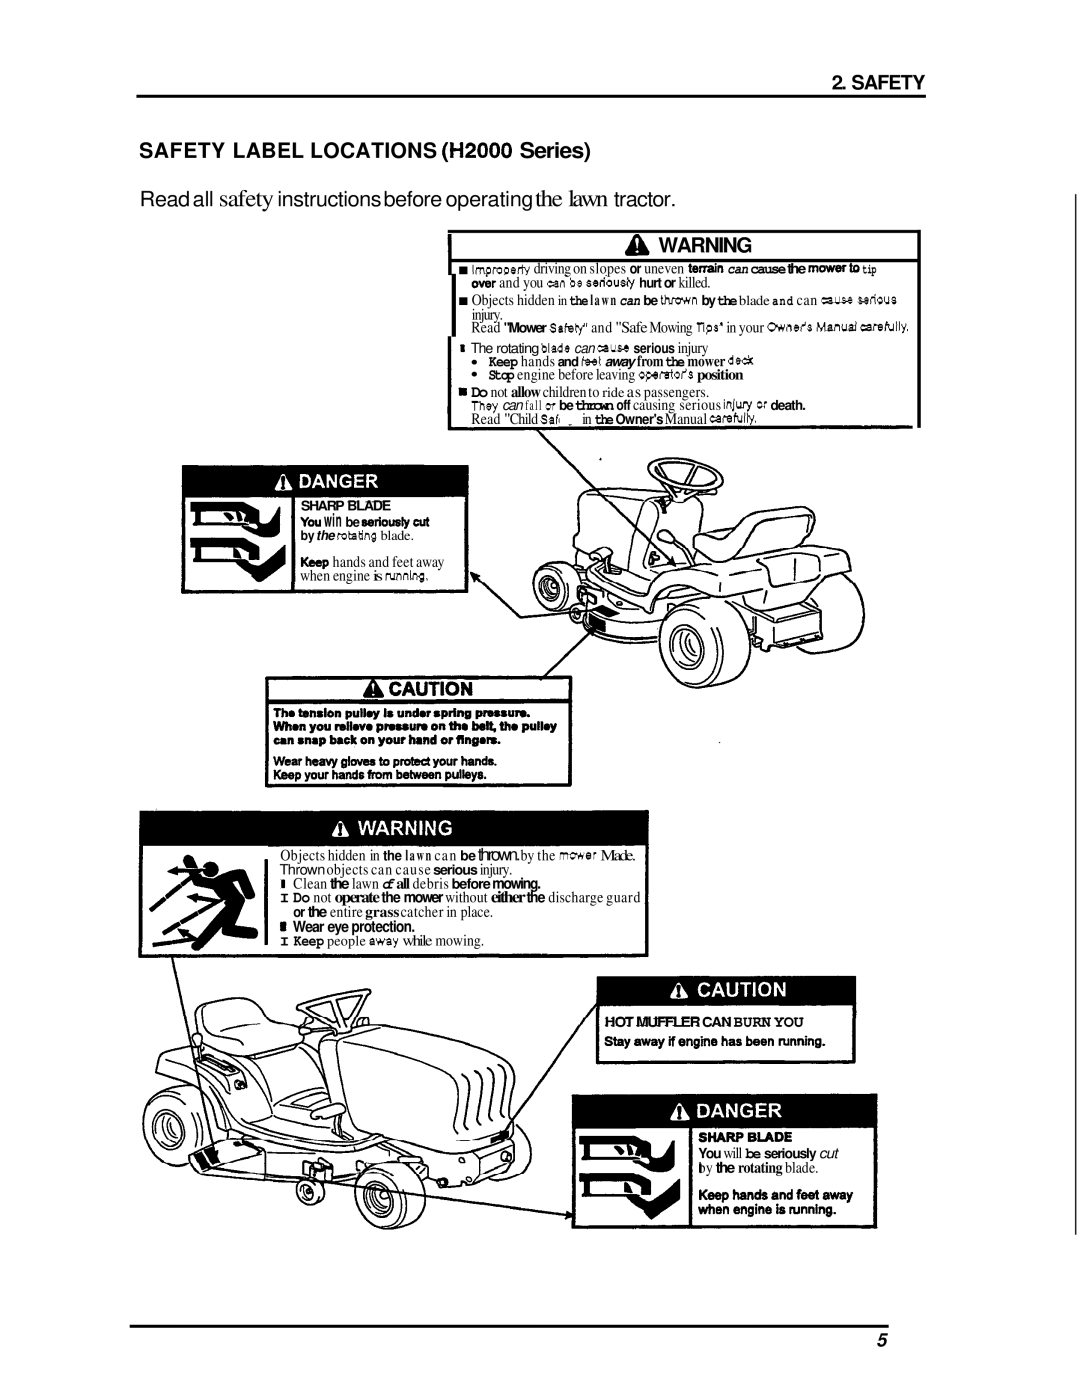 Honda Power Equipment manual SAFETY LABEL LOCATIONS H2000Series, Safety, IWear eye protection 